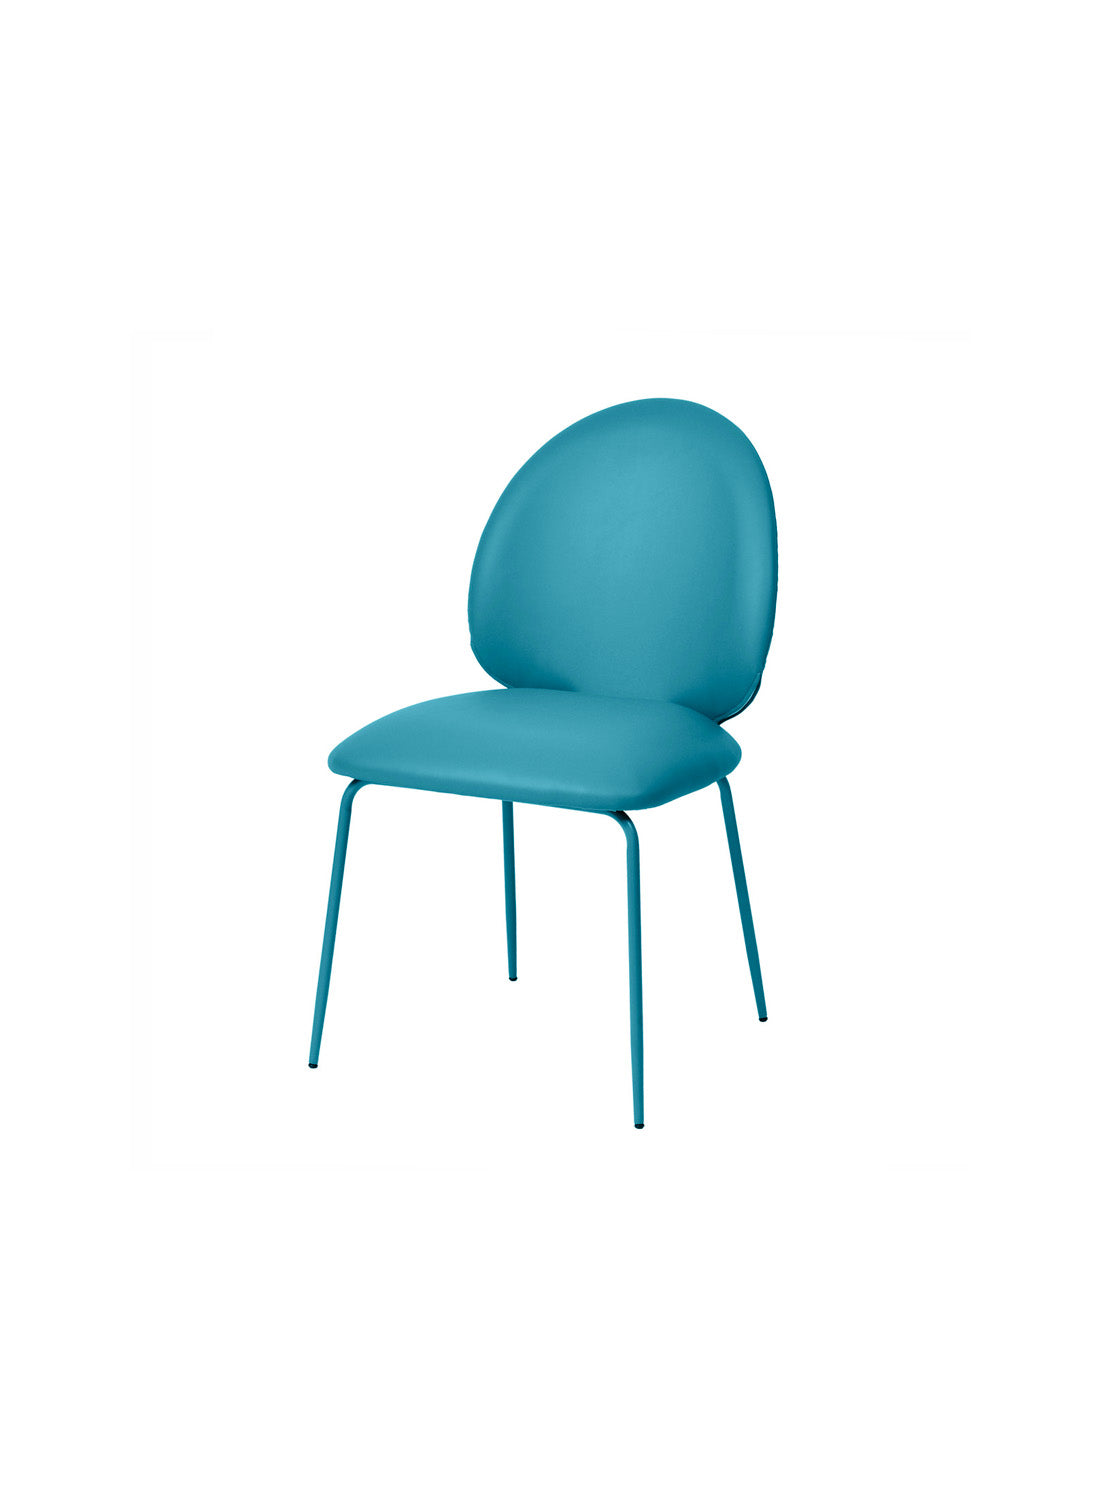 Sandy Dining Chair Set Of 2, blue